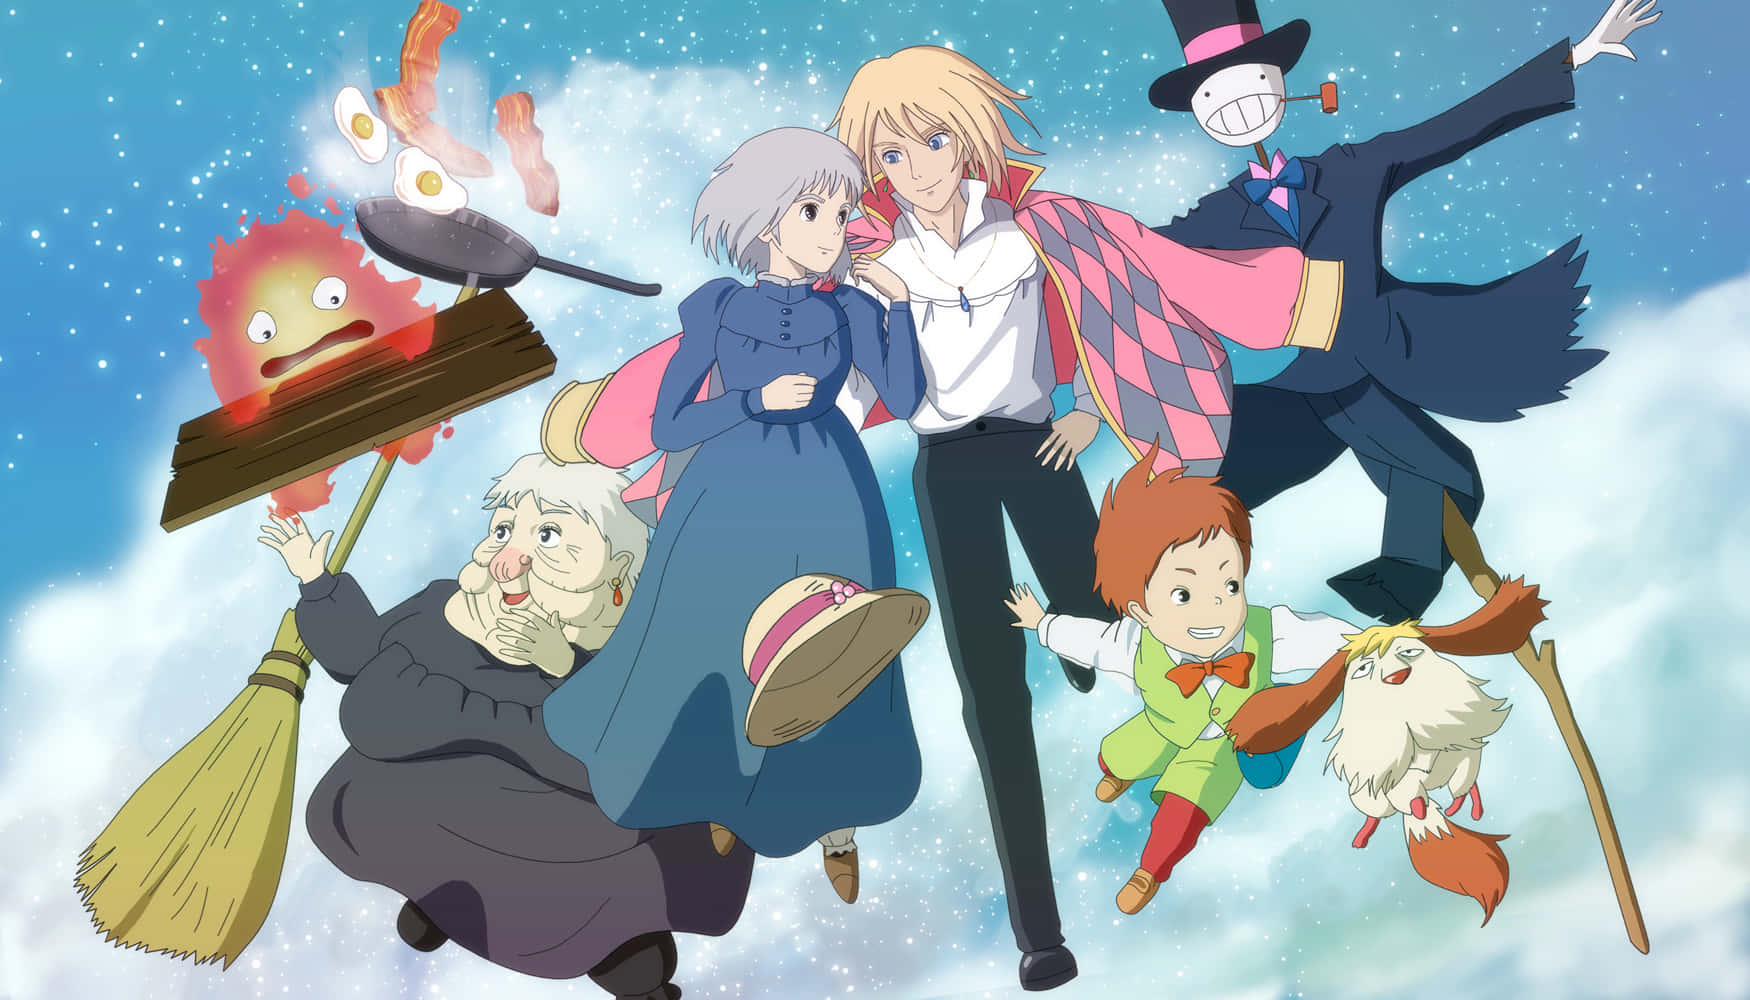 A Group Of People In An Anime With A Broom